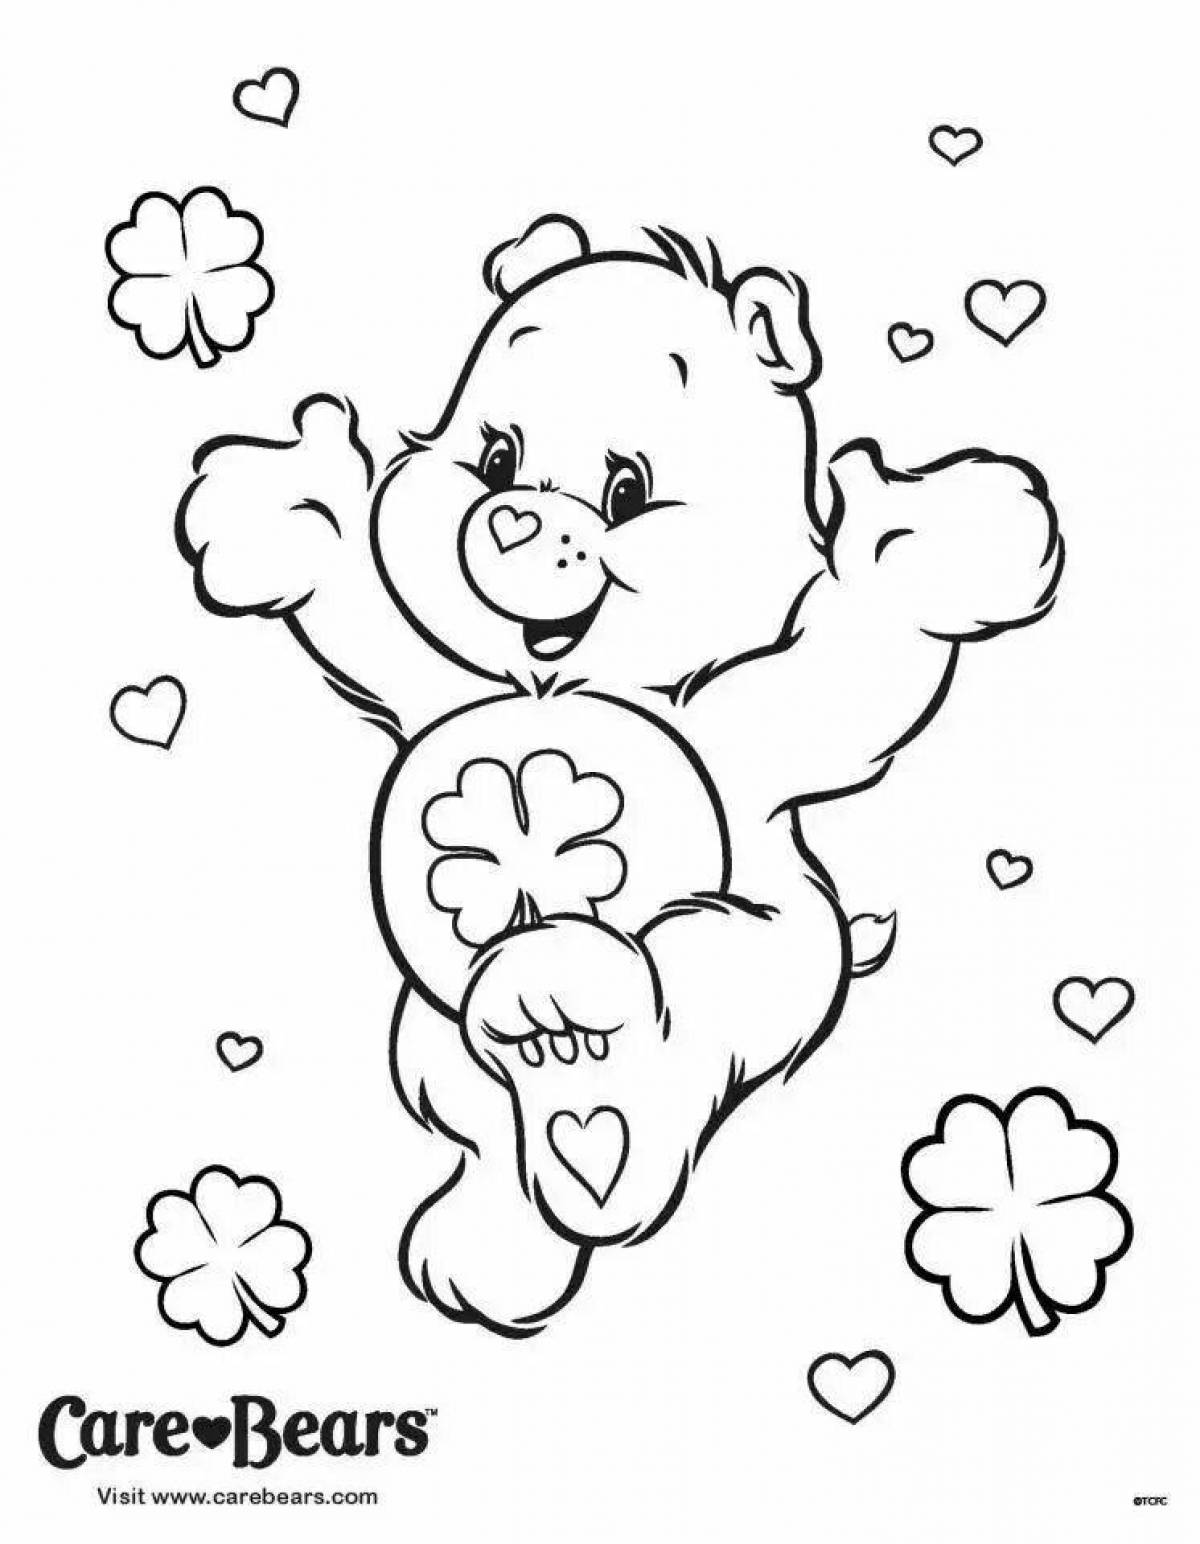 Playful care bears coloring page